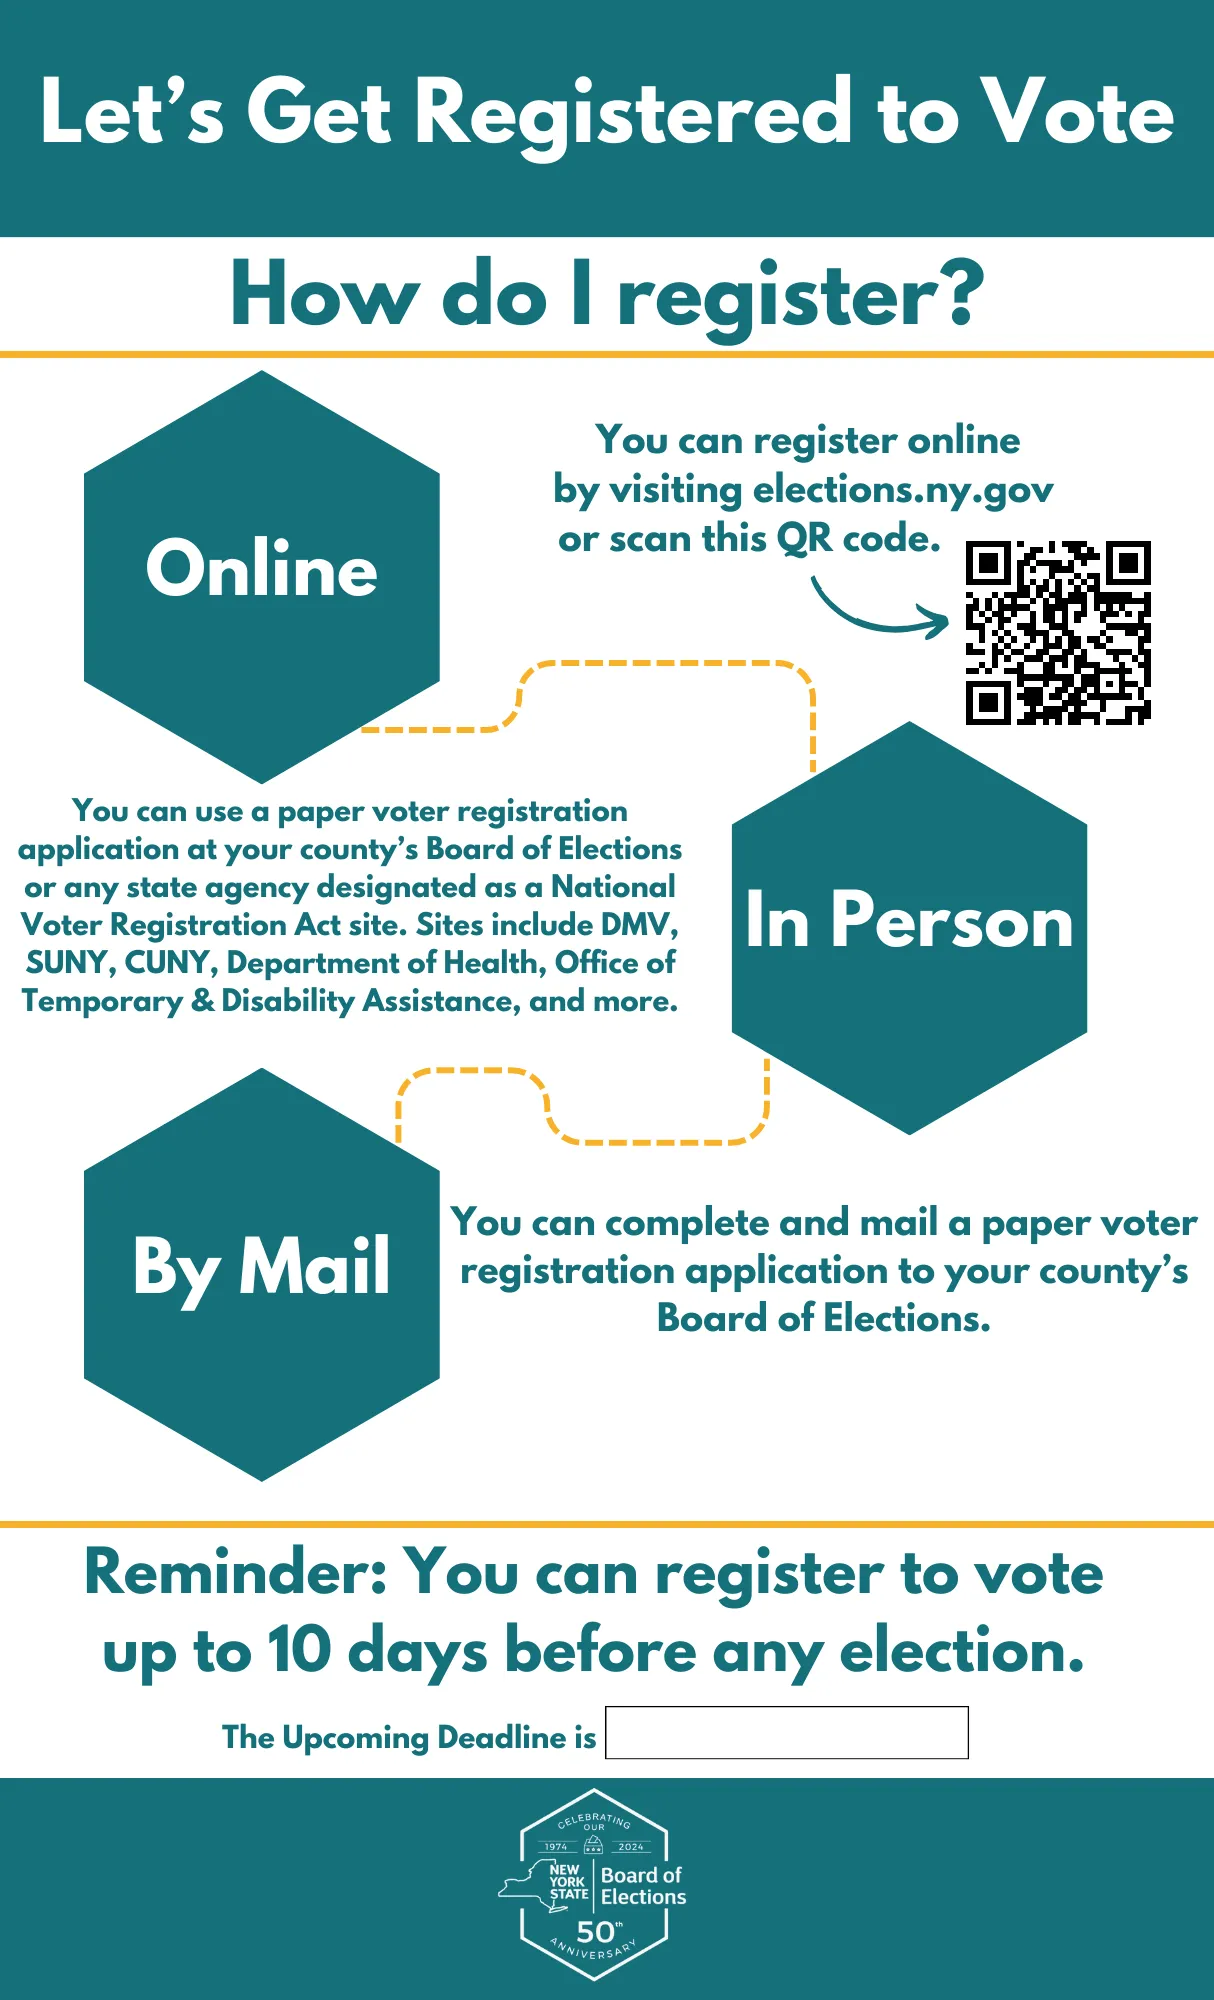 Register to vote at https://elections.ny.gov/register-vote . You can also use a paper voter registration application at your county's Board of Elections or any state agency designated as a National Voter Registration Act site. Sites include DMV, SUNY, CUNY, Department of Health, Office of Temporary & Disability Assistance, and more. You can complete and mail a paper voter registration application to your county's Board of Elections. Reminder: You can register to vote up to 10 days before any election.